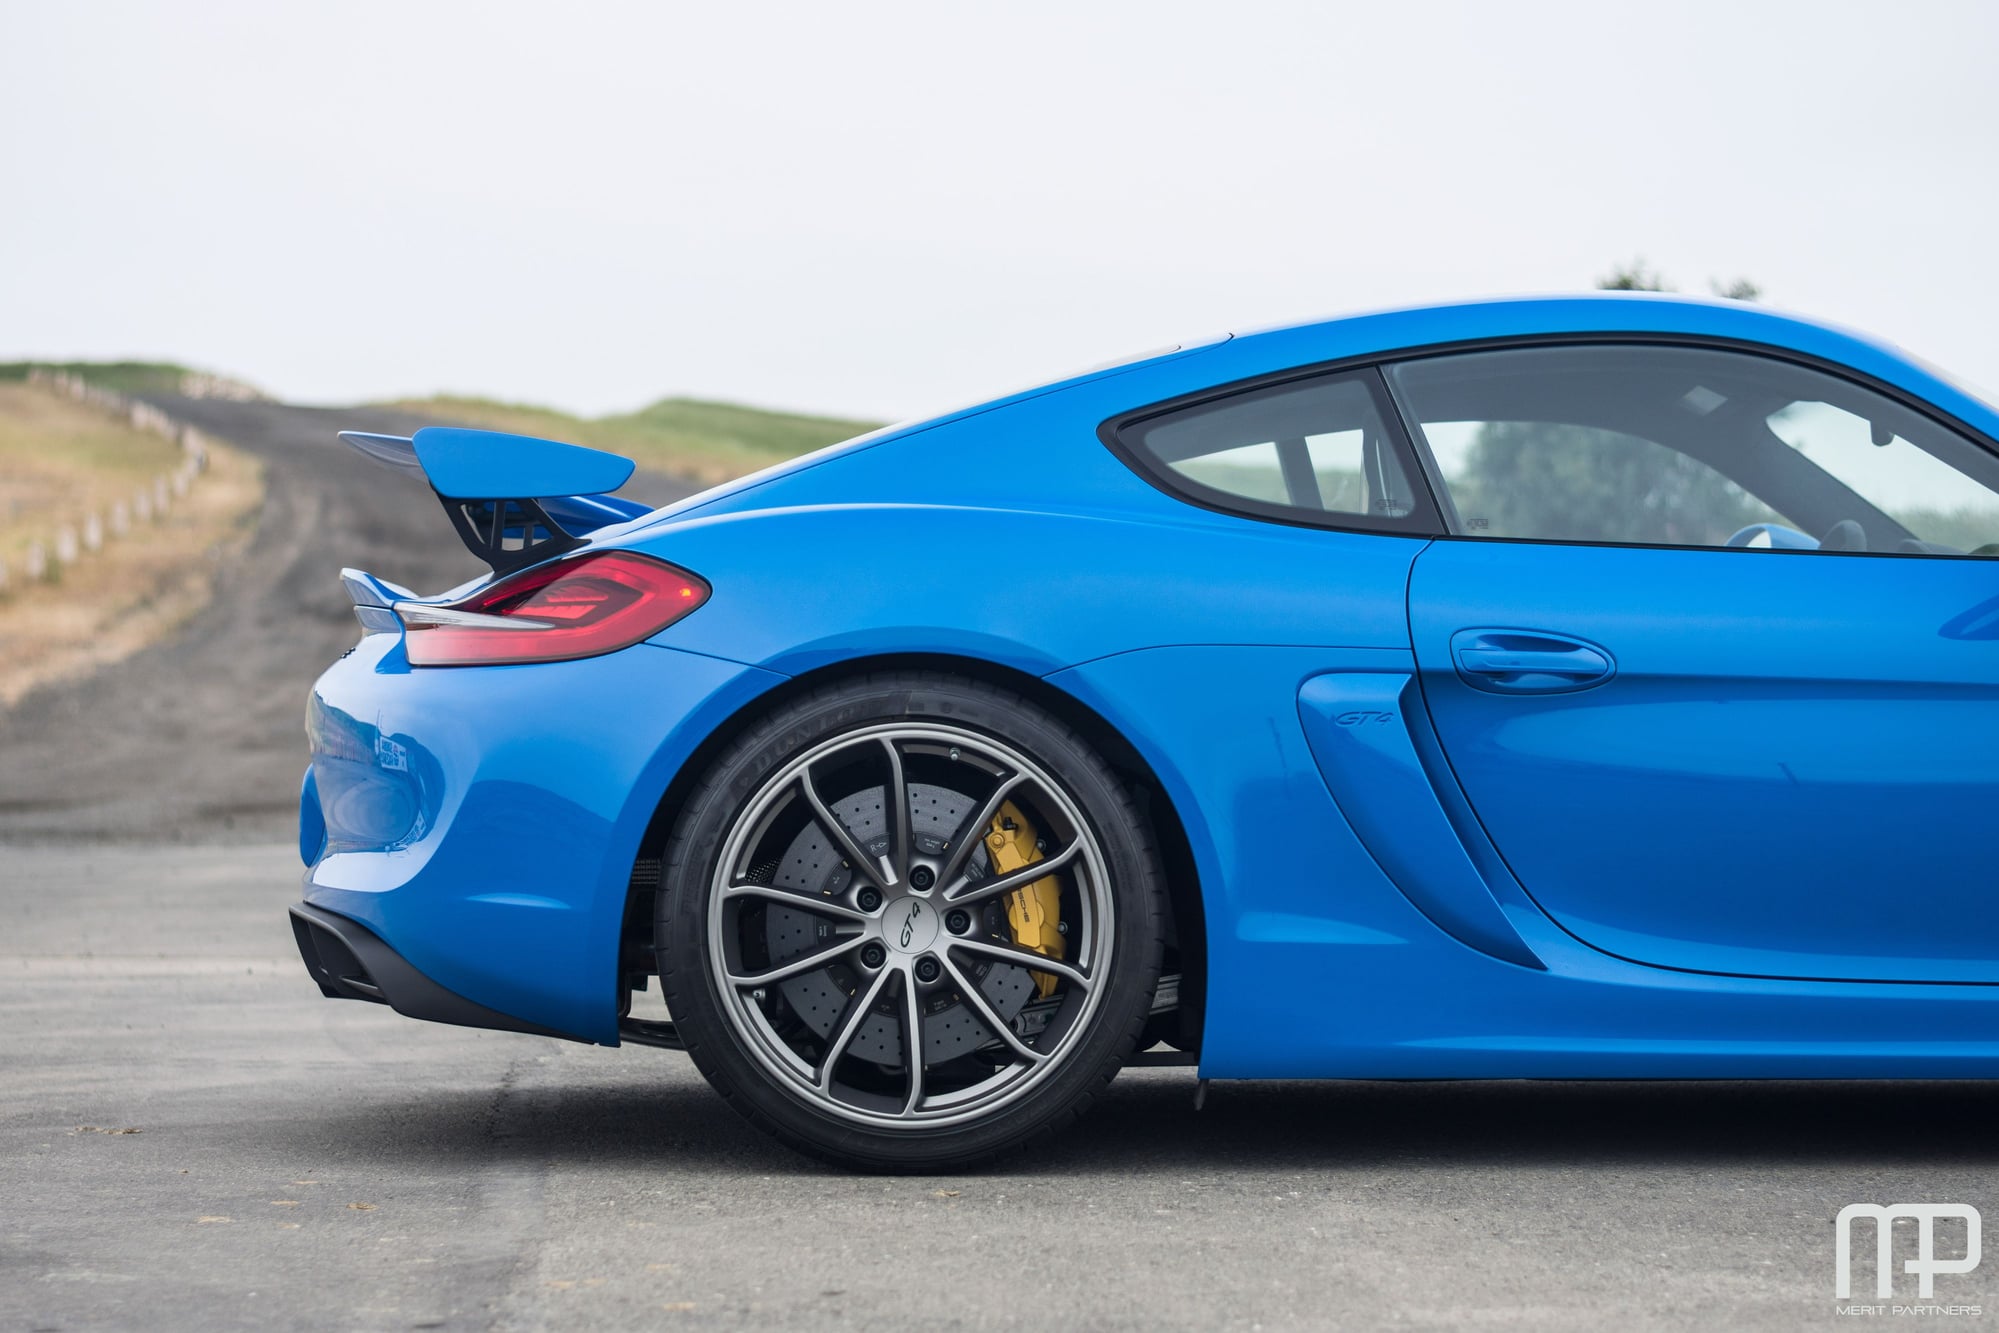 2016 Porsche Cayman GT4 - 2016 Porsche Cayman GT4 Paint-to-Sample Voodoo Blue - Used - VIN WP0AC2A84GK191576 - 970 Miles - 6 cyl - 2WD - Manual - Coupe - Blue - Atlanta, GA 30360, United States